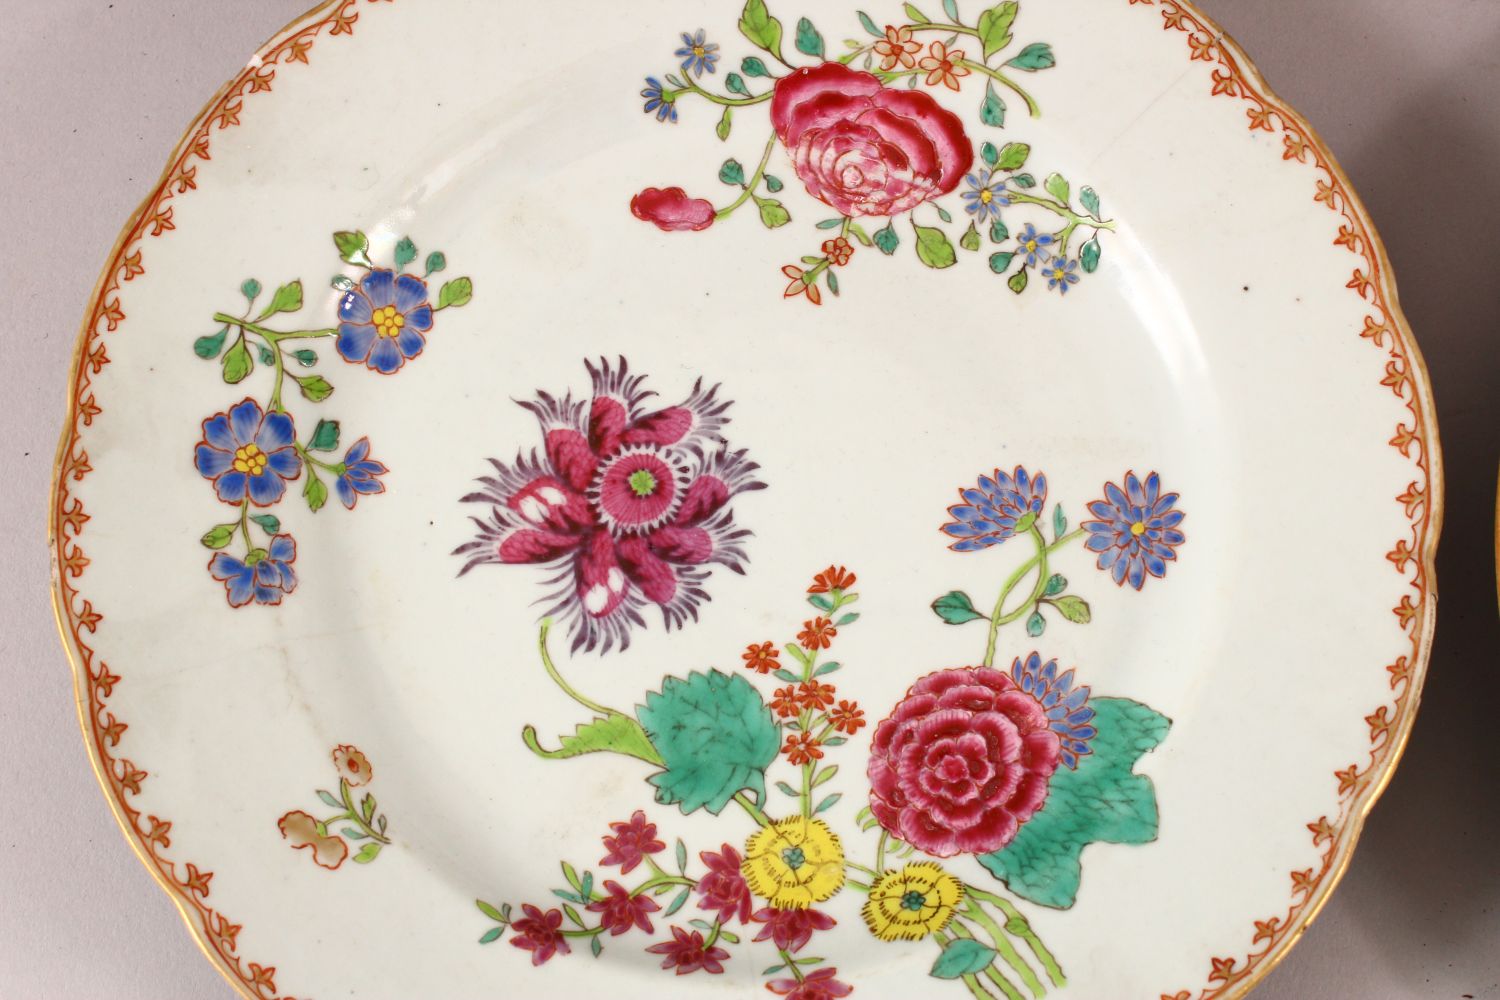 FOUR CHINESE 18TH CENTURY FAMILLE ROSE PORCELAIN PLATES, each with varying floral decoration, 23cm - Image 5 of 6